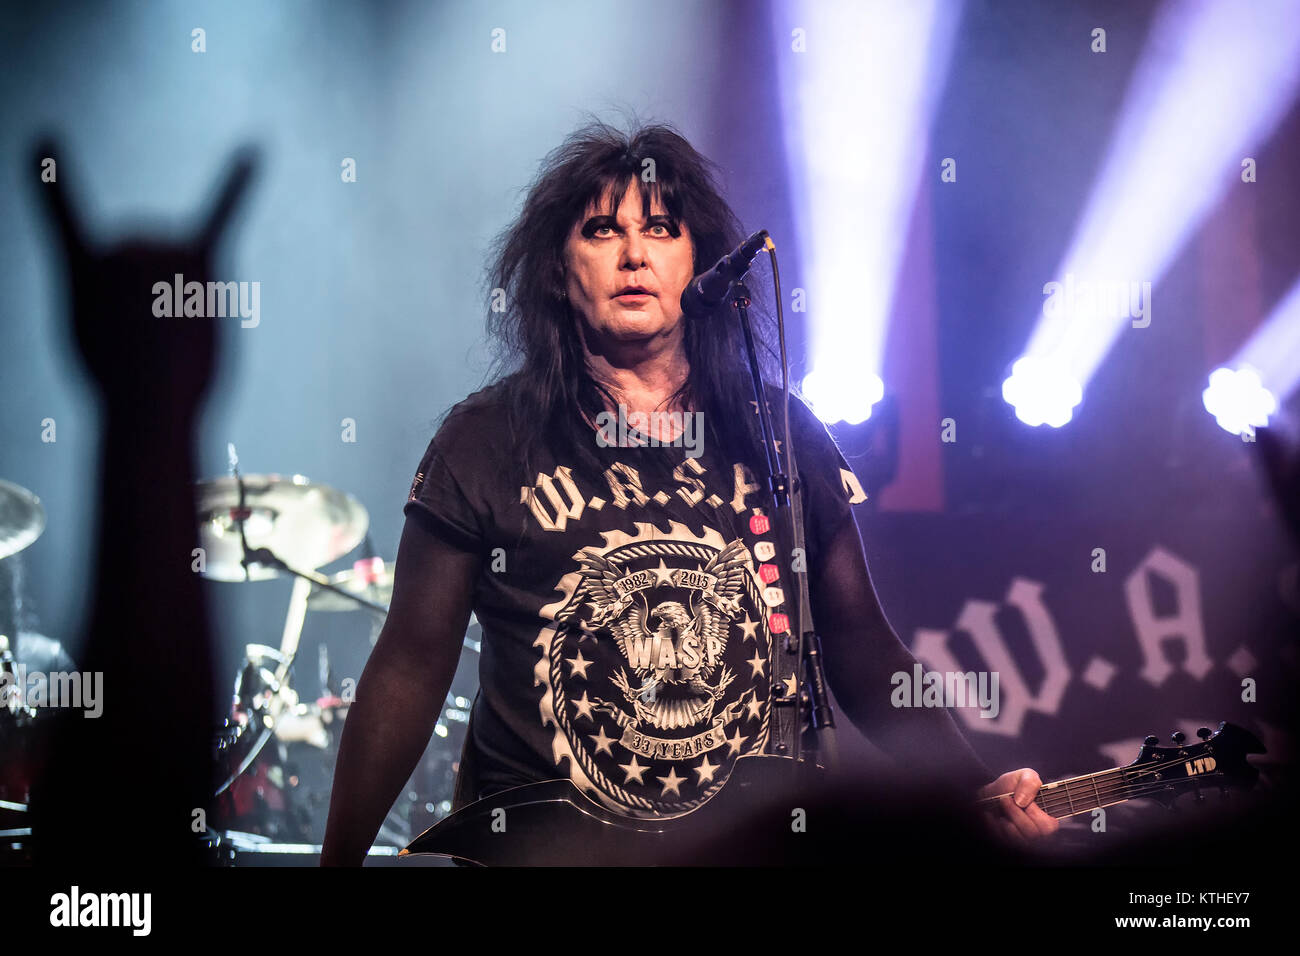 The American glam metal band W.A.S.P. performs a live concert at Union Scene in Oslo. Here the band’s last remaining original band member, vocalist singer and songwriter, Blackie Lawless is seen live on stage. Norway, 14/10 2015. Stock Photo